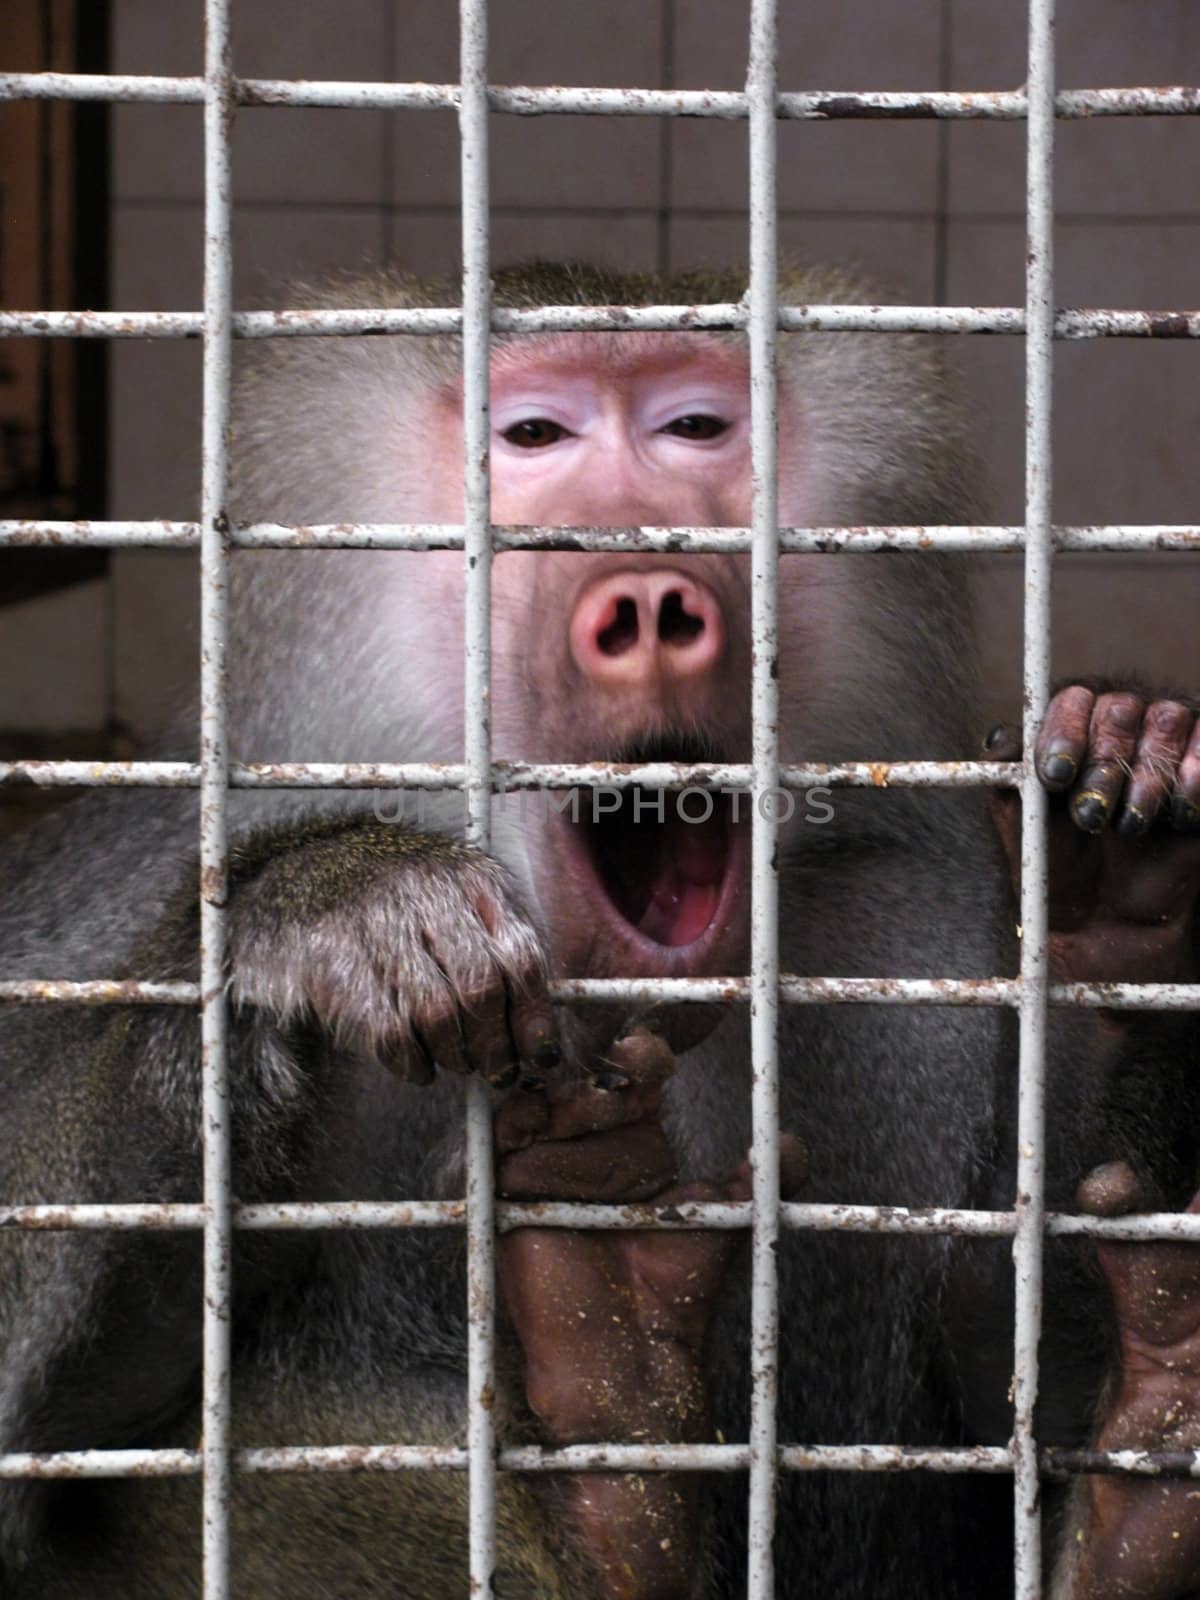 yawning monkey in a zoo cage